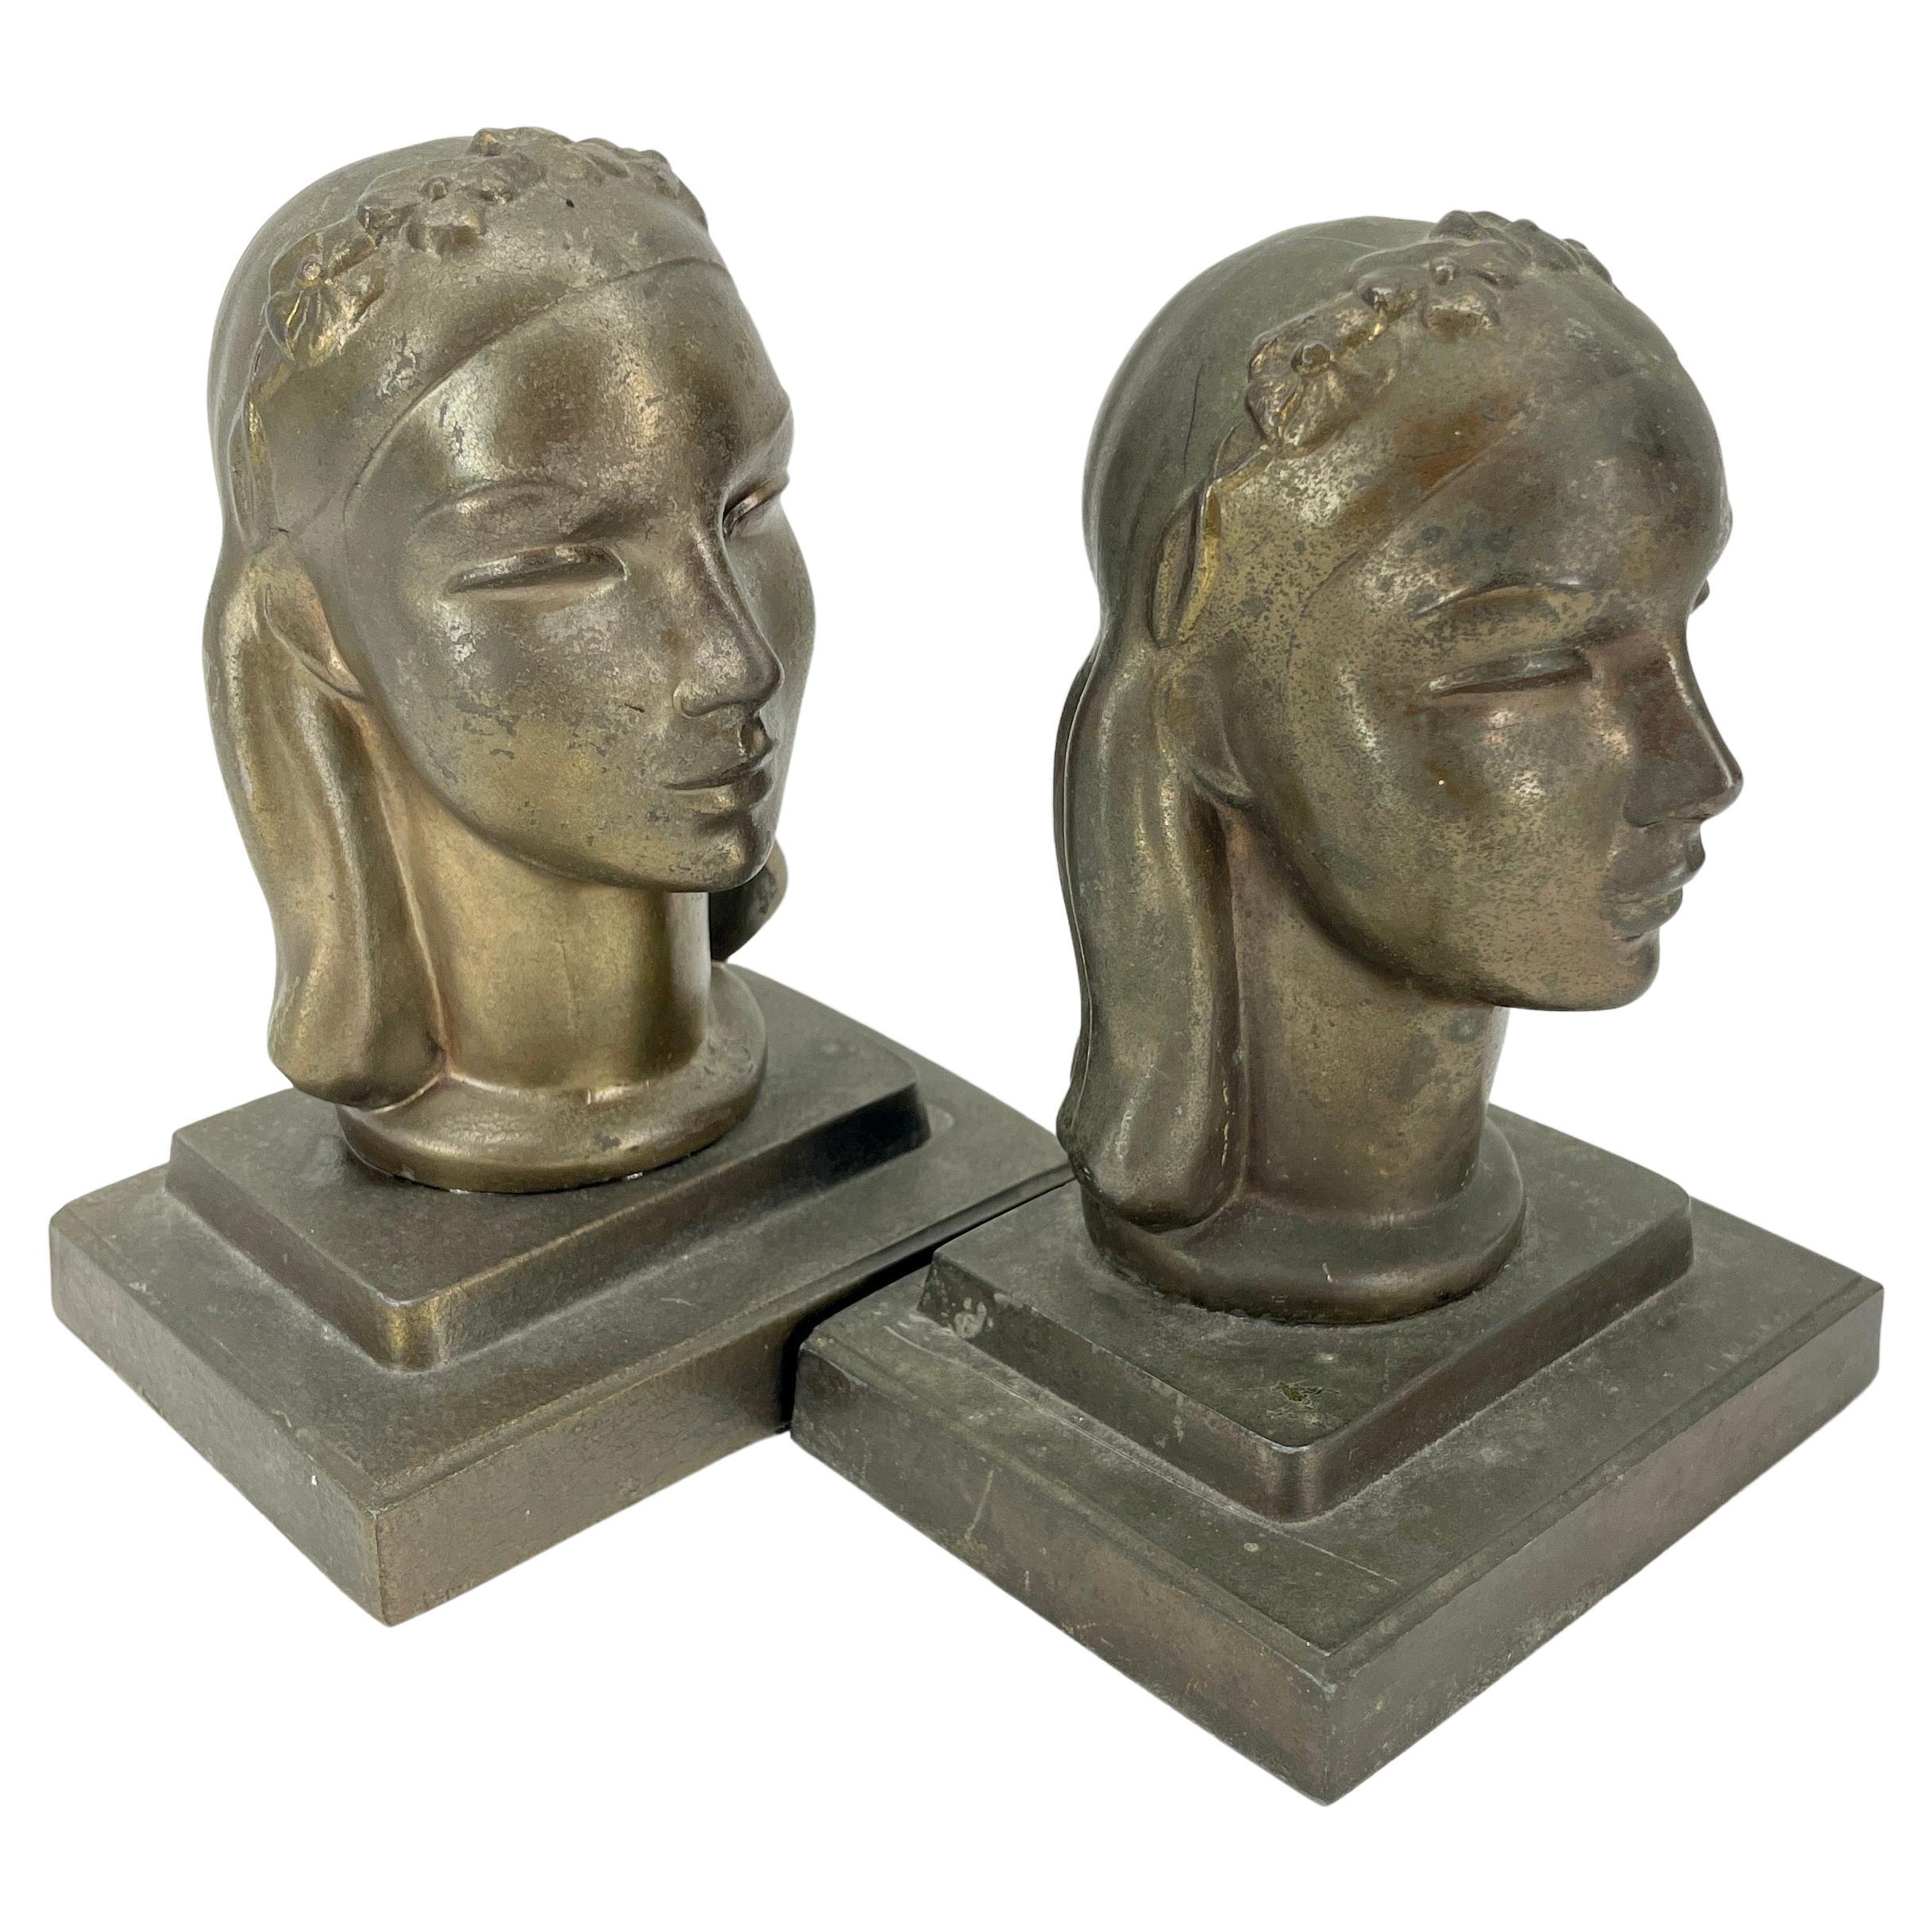 Metal Pair Art Deco Female Bust Bookends Sculptures by Frankart, circa 1930s